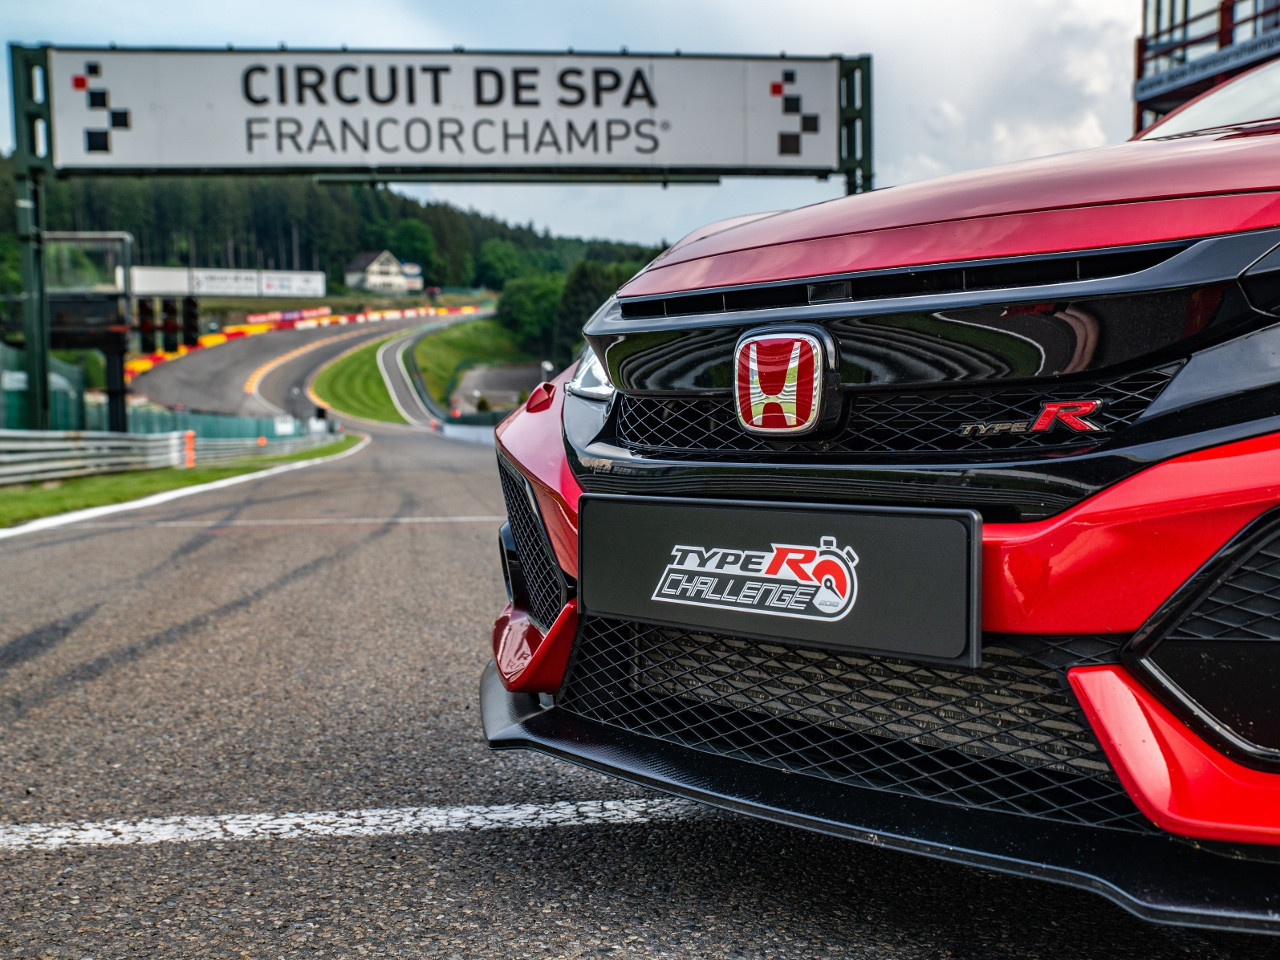 Type R at Francorchamps - Close up front grille